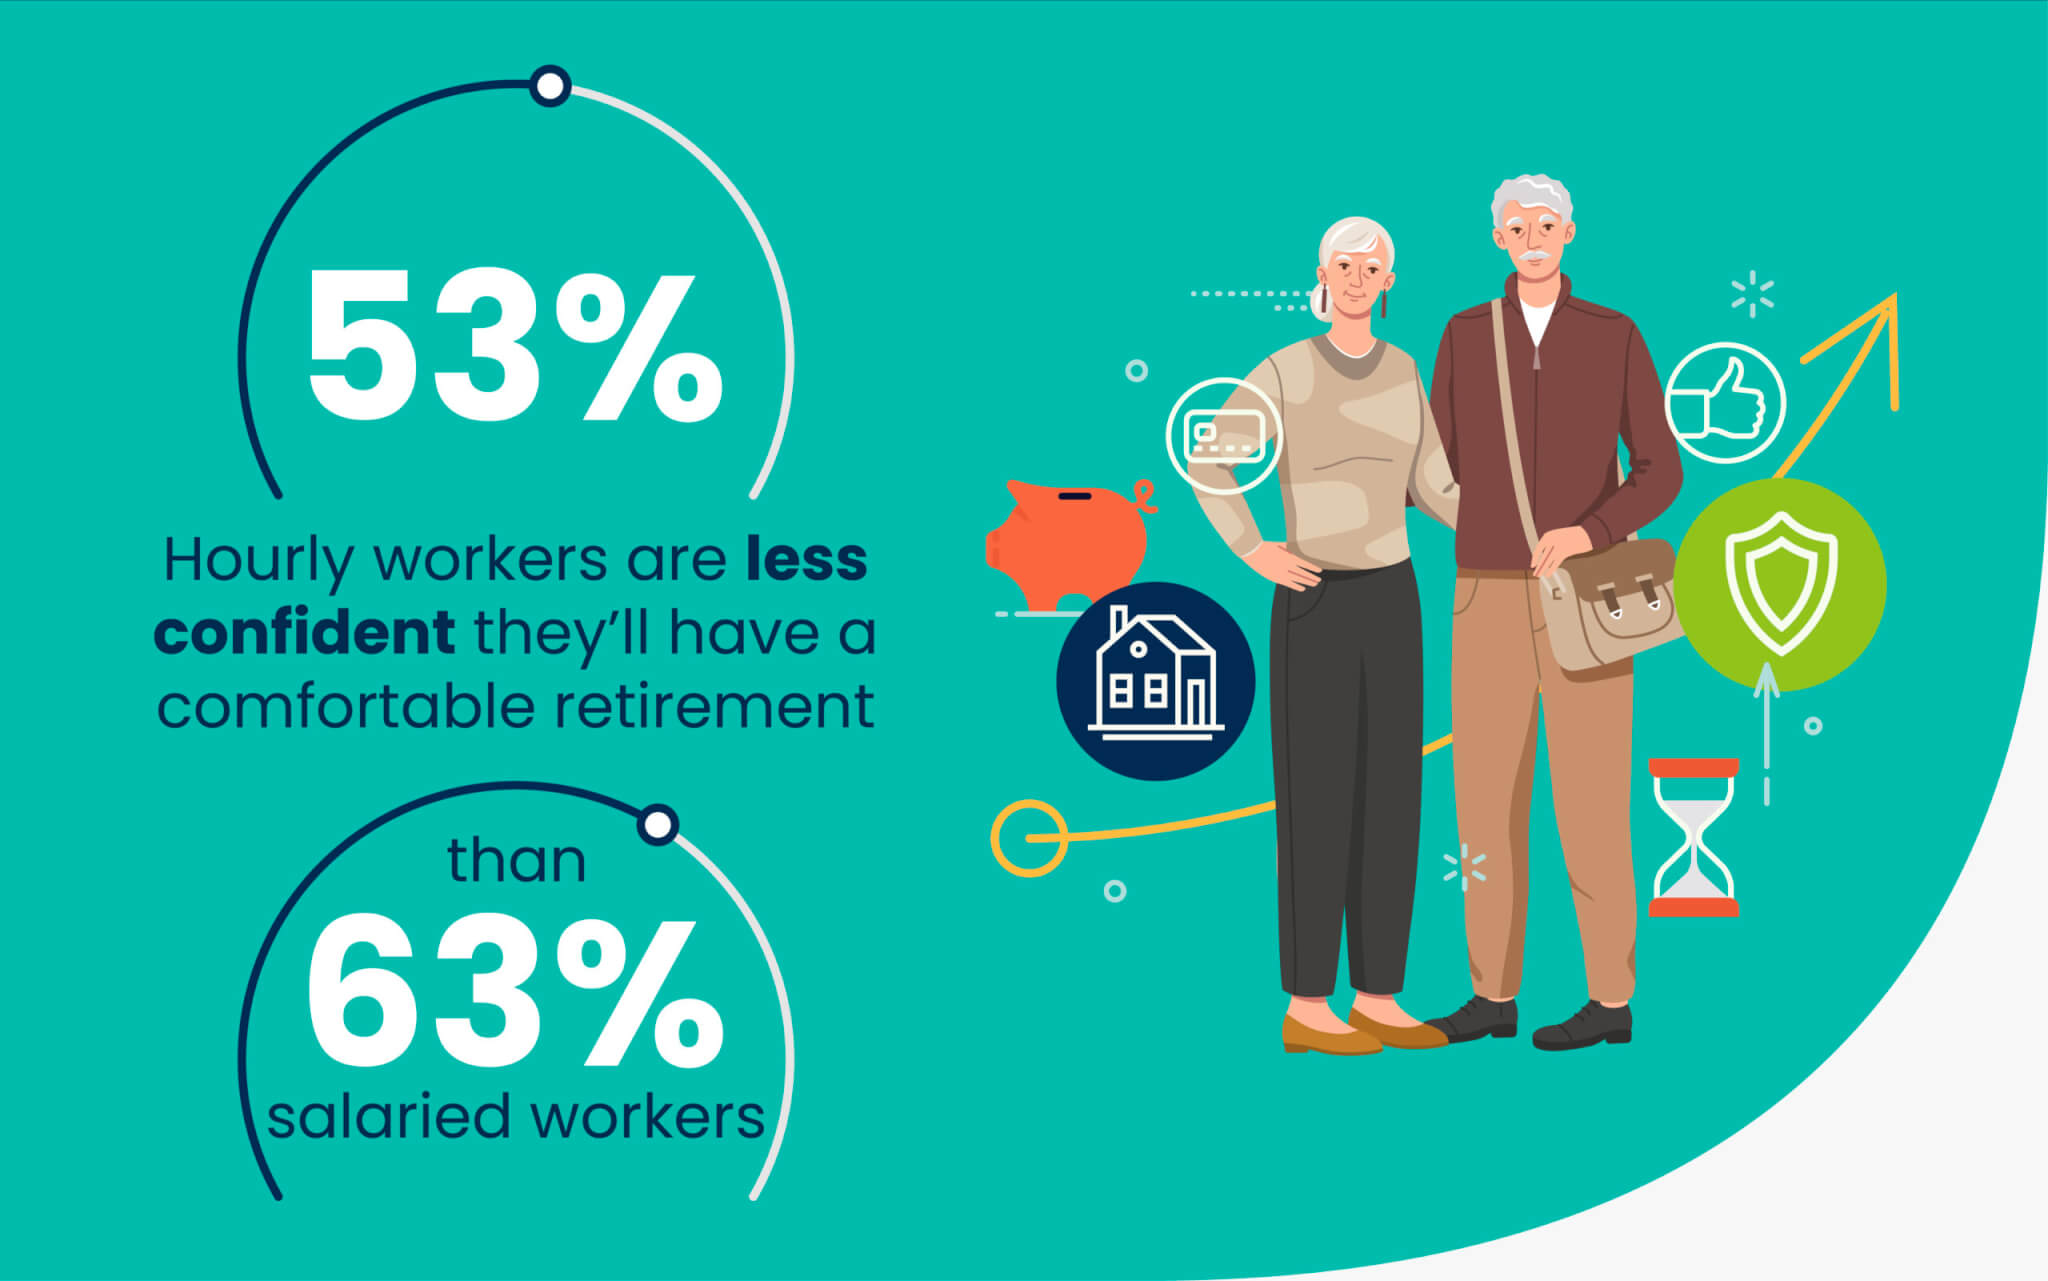 When will you retire? 33% of hourly workers are 'winging' their future plans